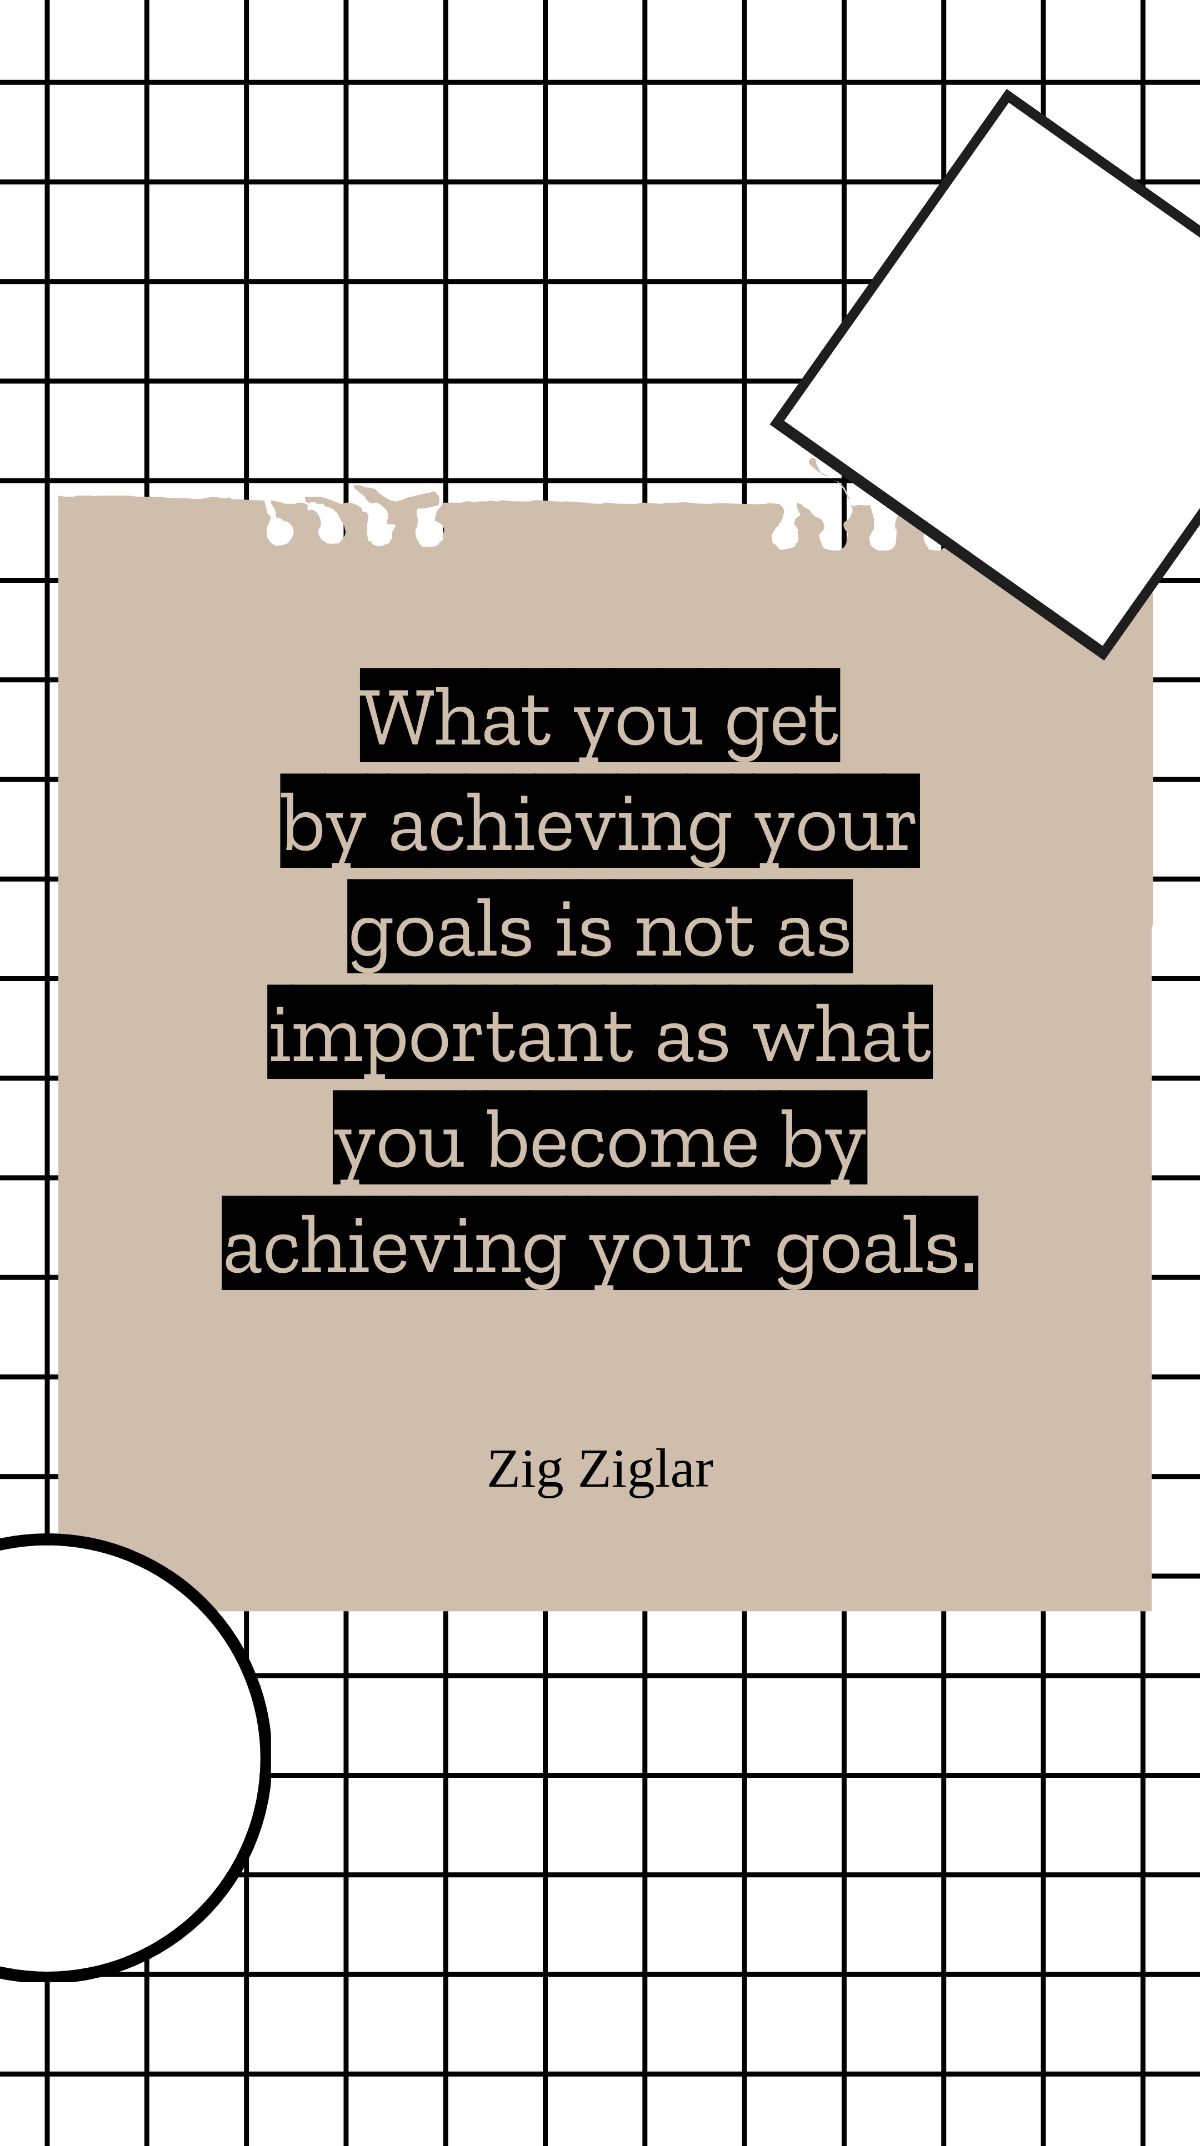 Zig Ziglar - What you get by achieving your goals is not as important as what you become by achieving your goals. Template